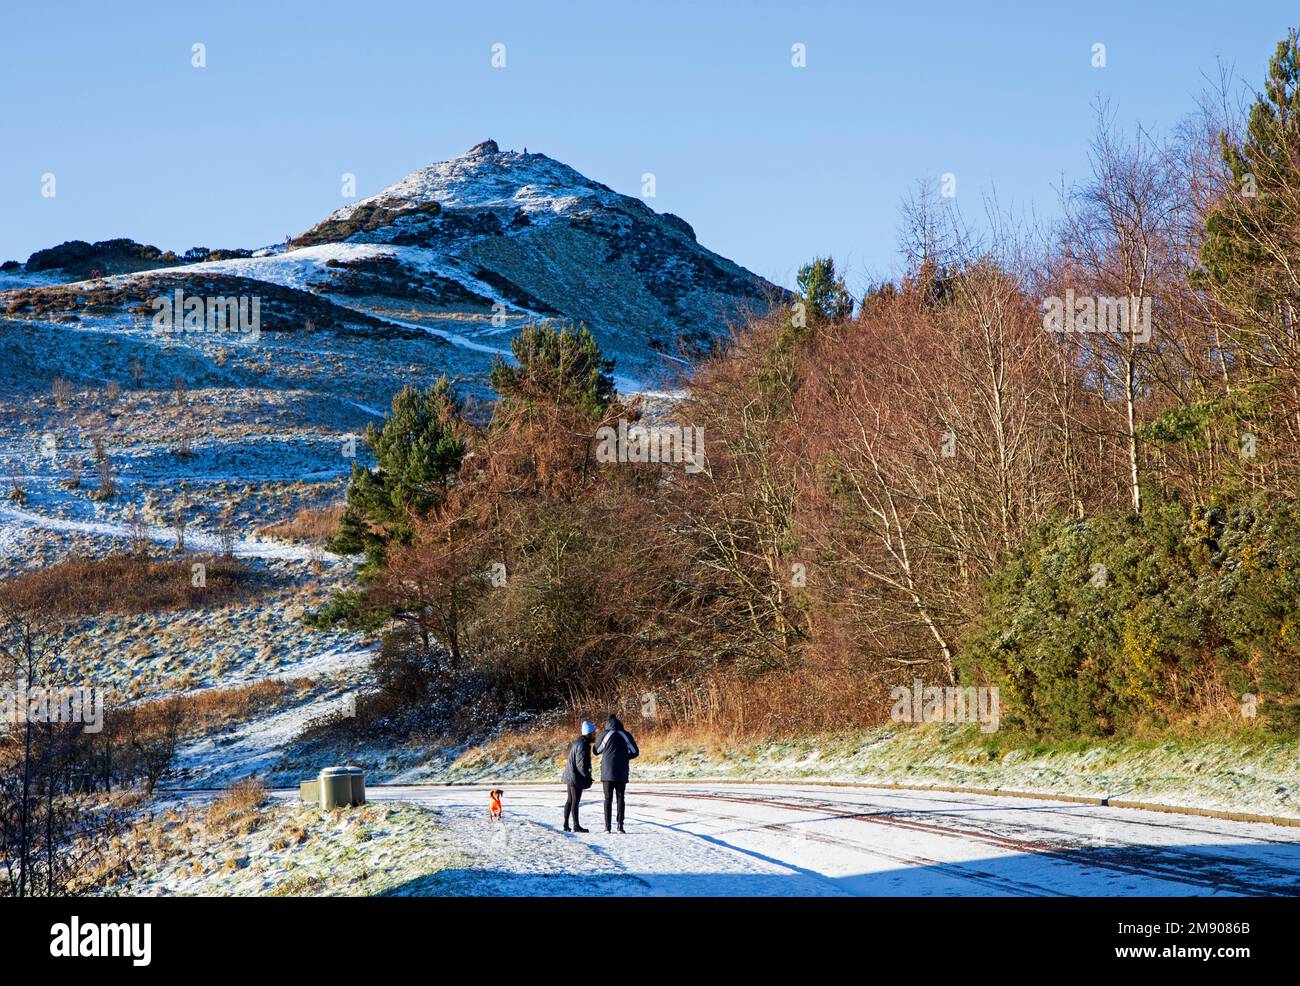 Holyrood Park, Edinburgh, Scotland, UK. 16th January 2023. Snow cover and icy roads and pavements in the Scottish capital, early morning temperature of minus 3 degrees centigrade. Pictured: A couple walk along the icy pavement with the summit of Arthur's Seat in background. Credit: ArchWhite/alamy live news. Stock Photo